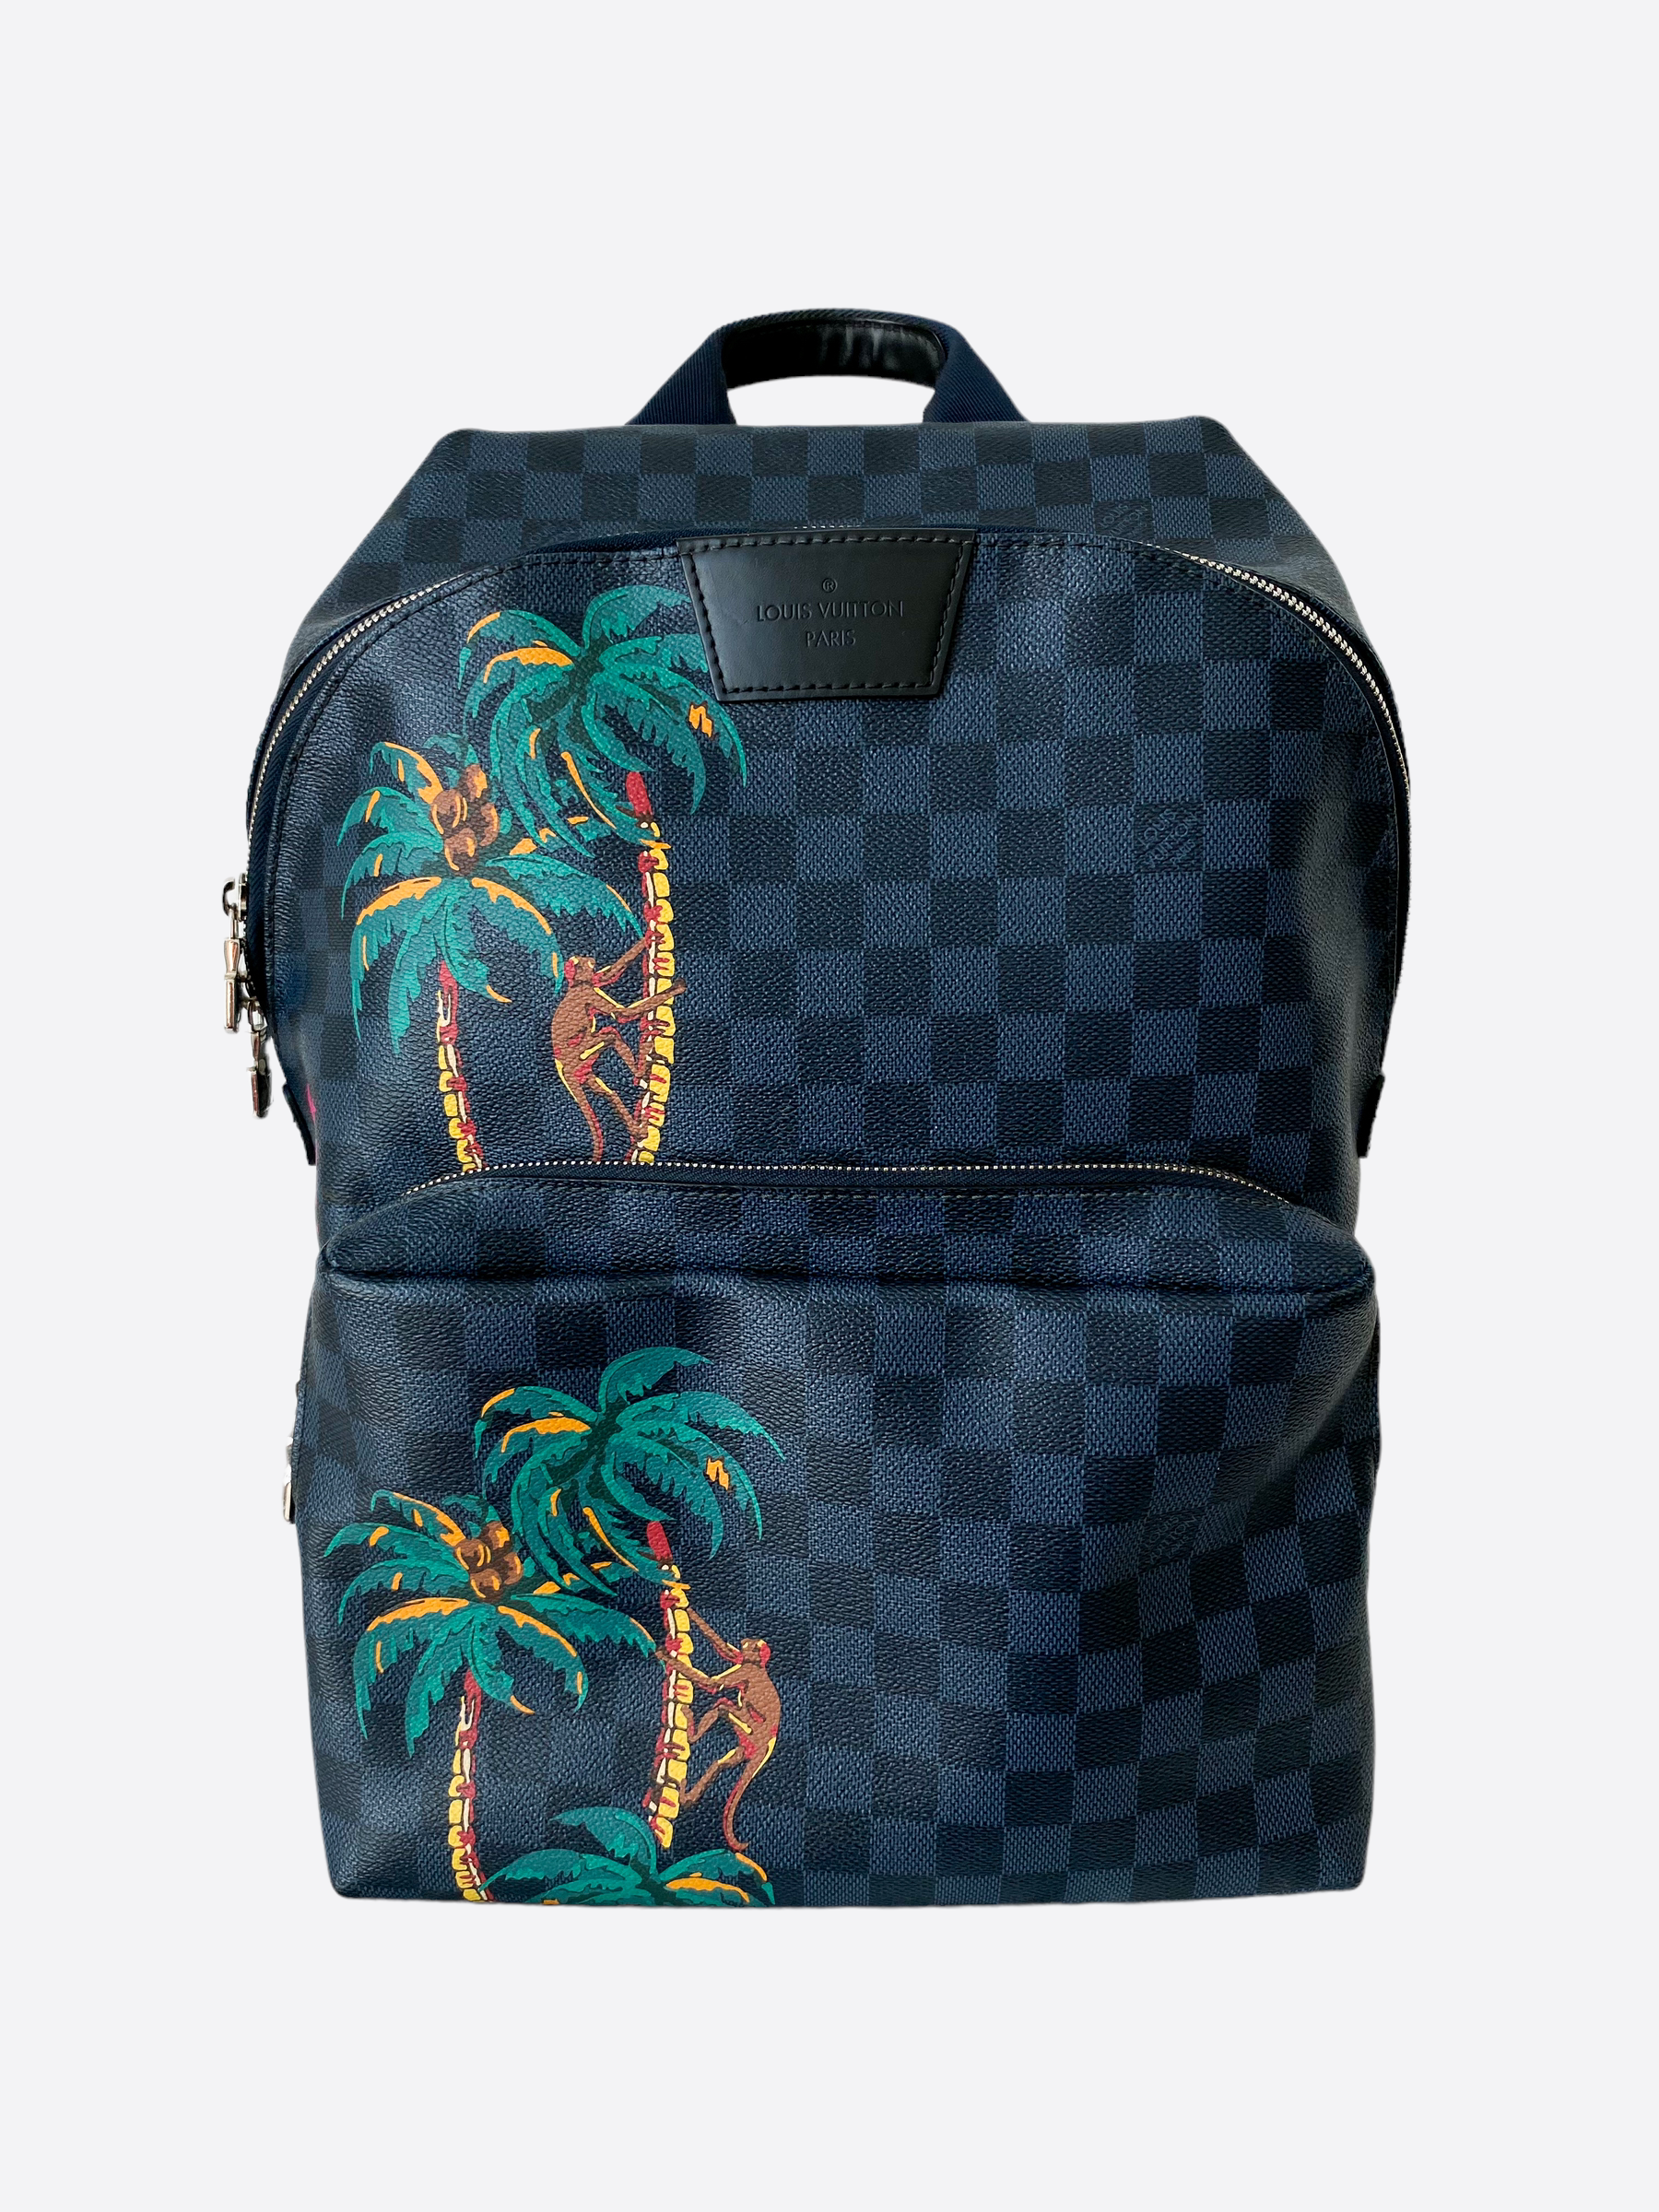 new louis vuitton backpack